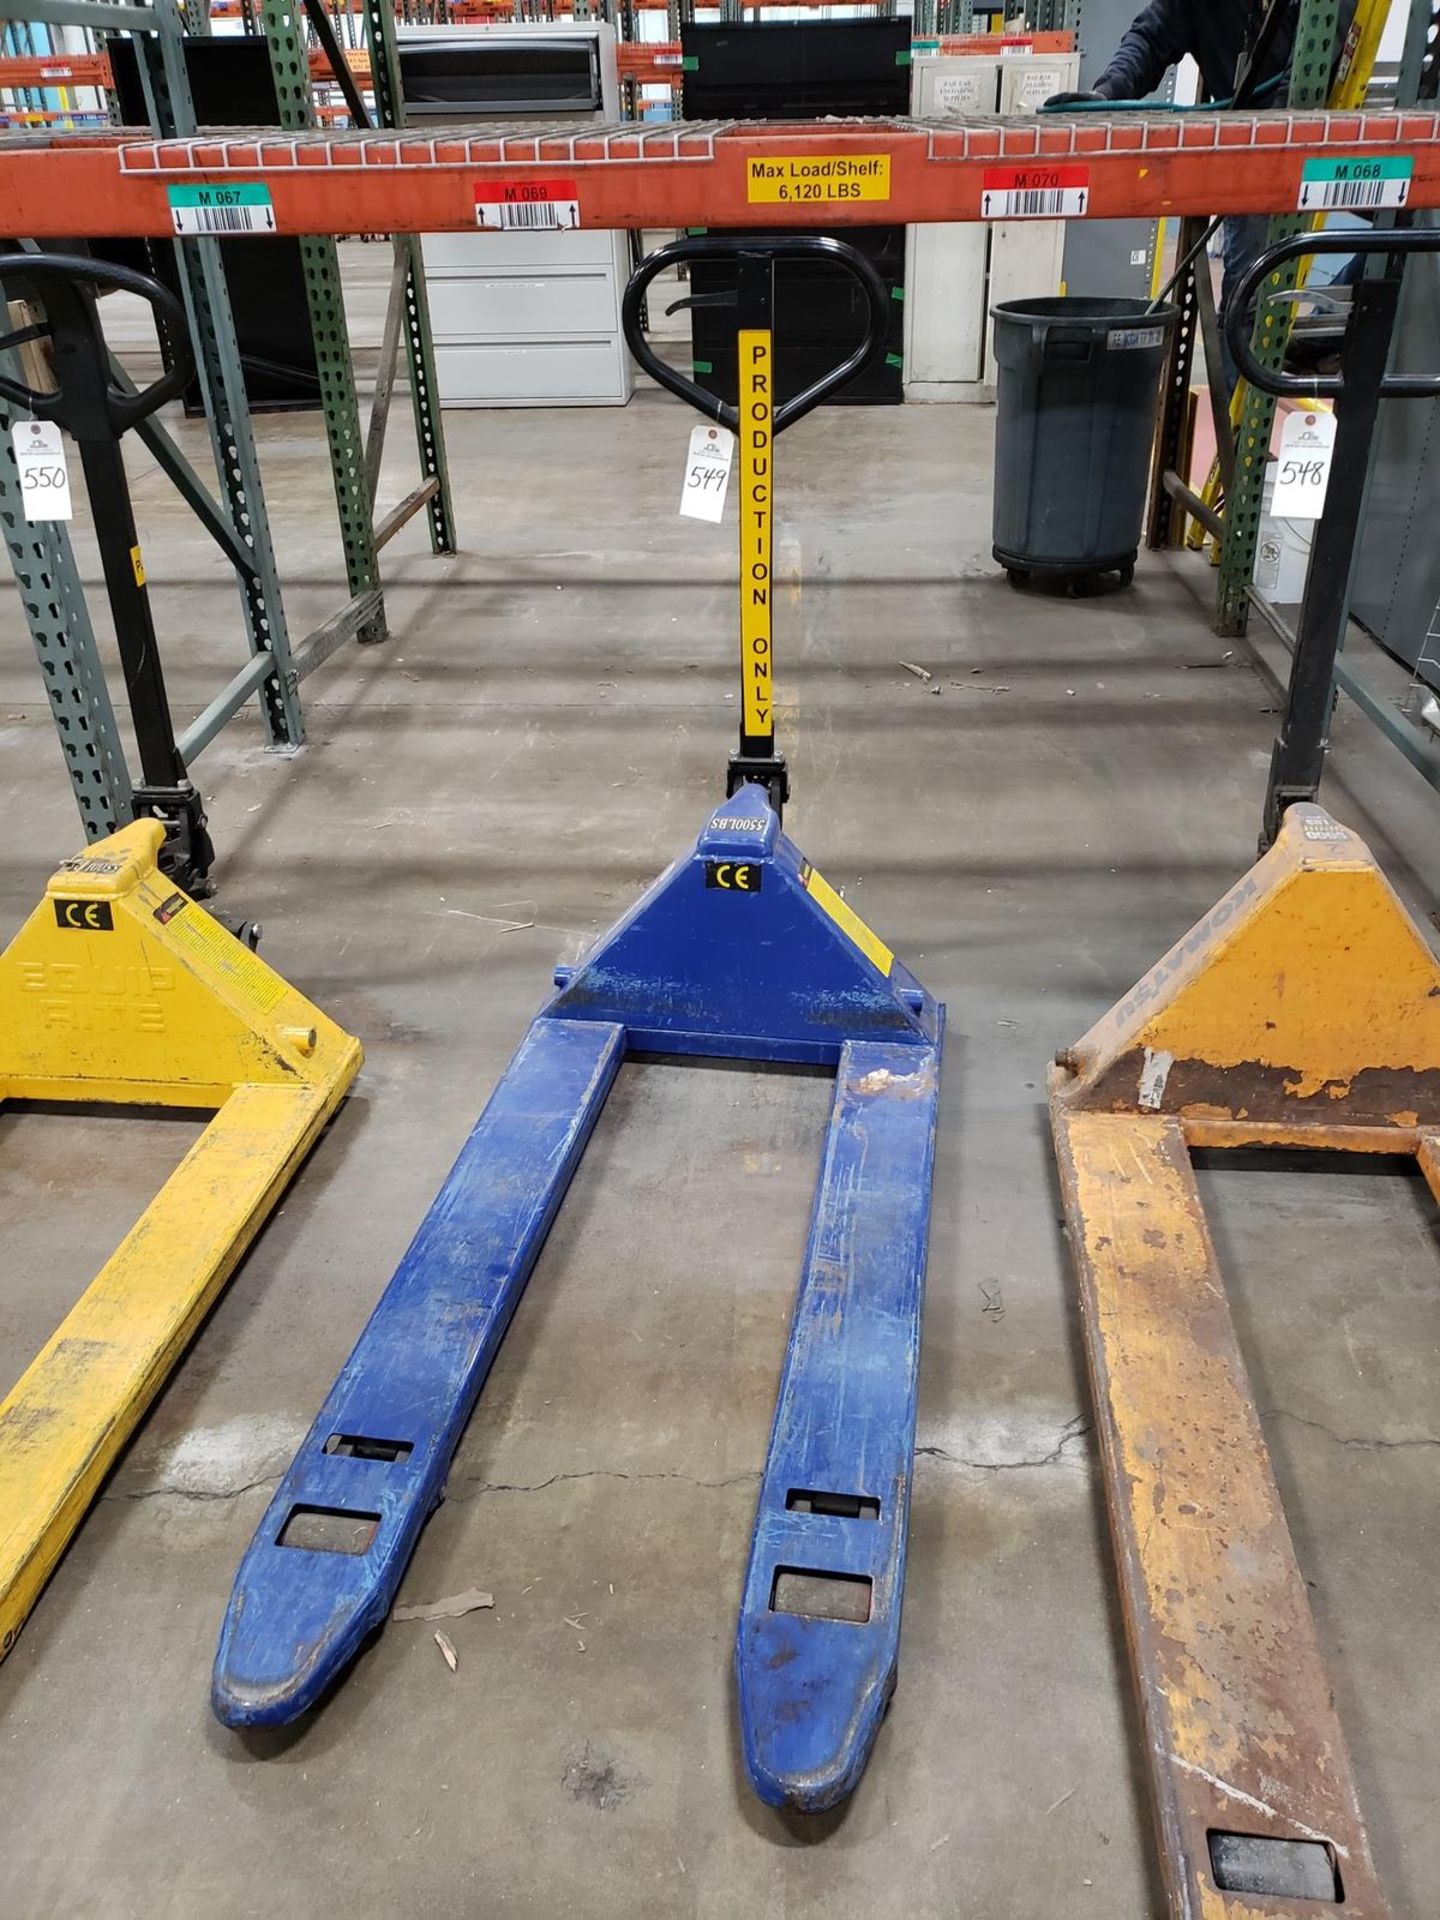 Pallet Jack | Rig Fee No Charge